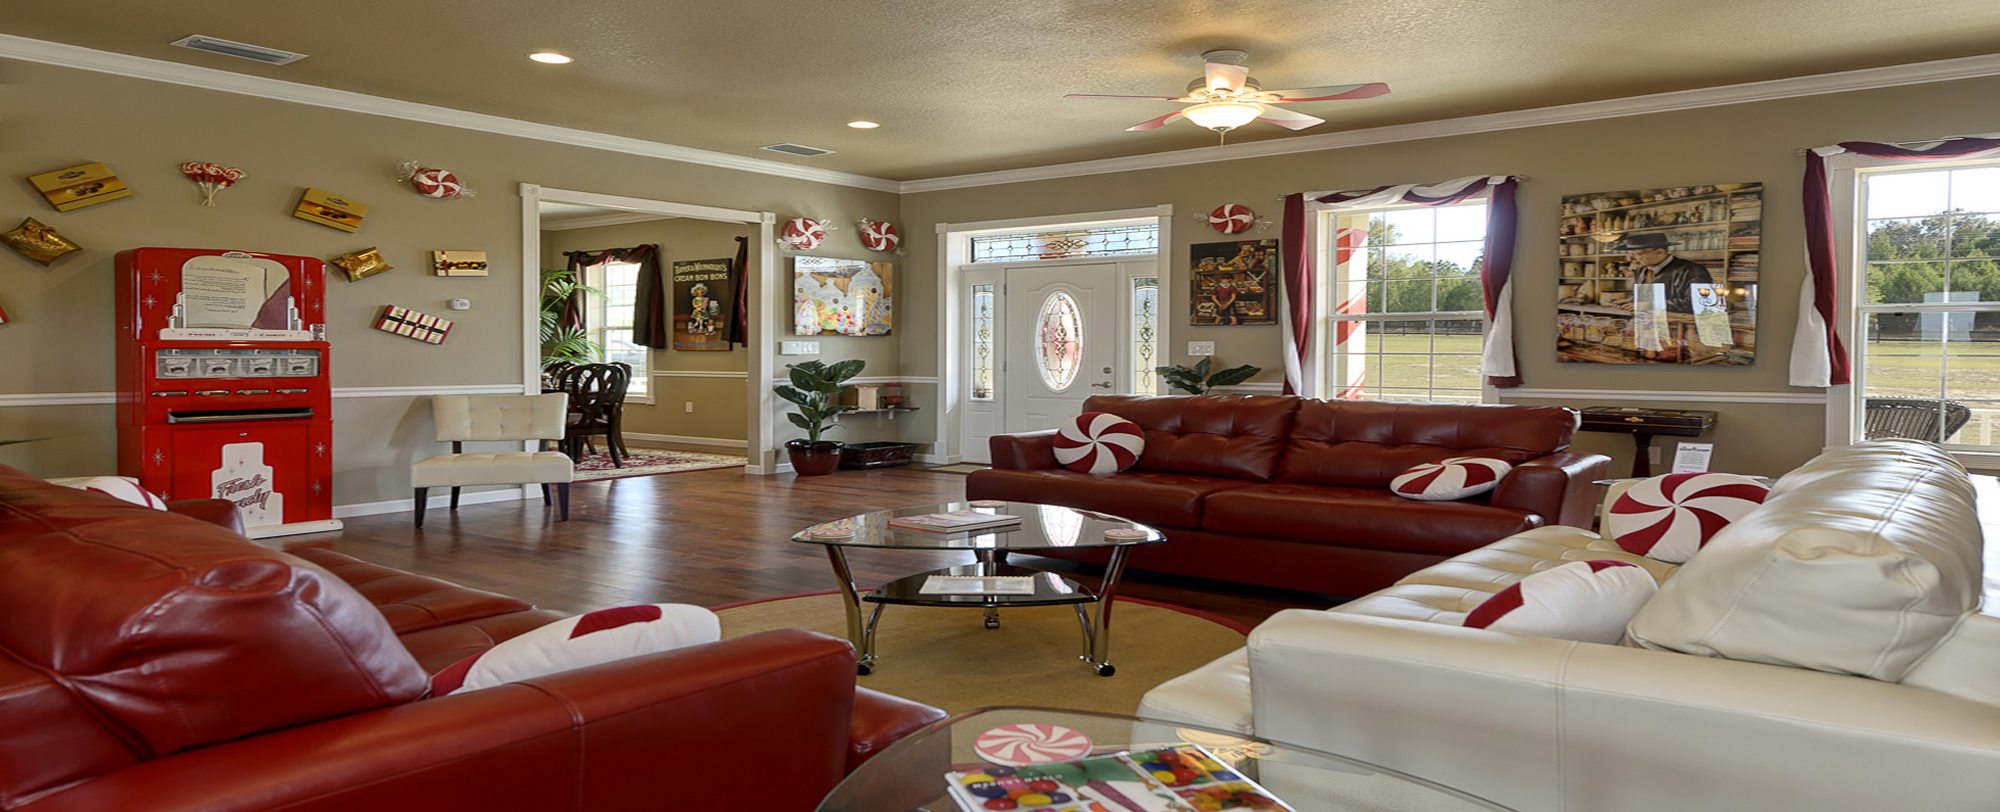 Play laser tag at The Sweet Escape  - A vacation rental home near Orlando, Florida